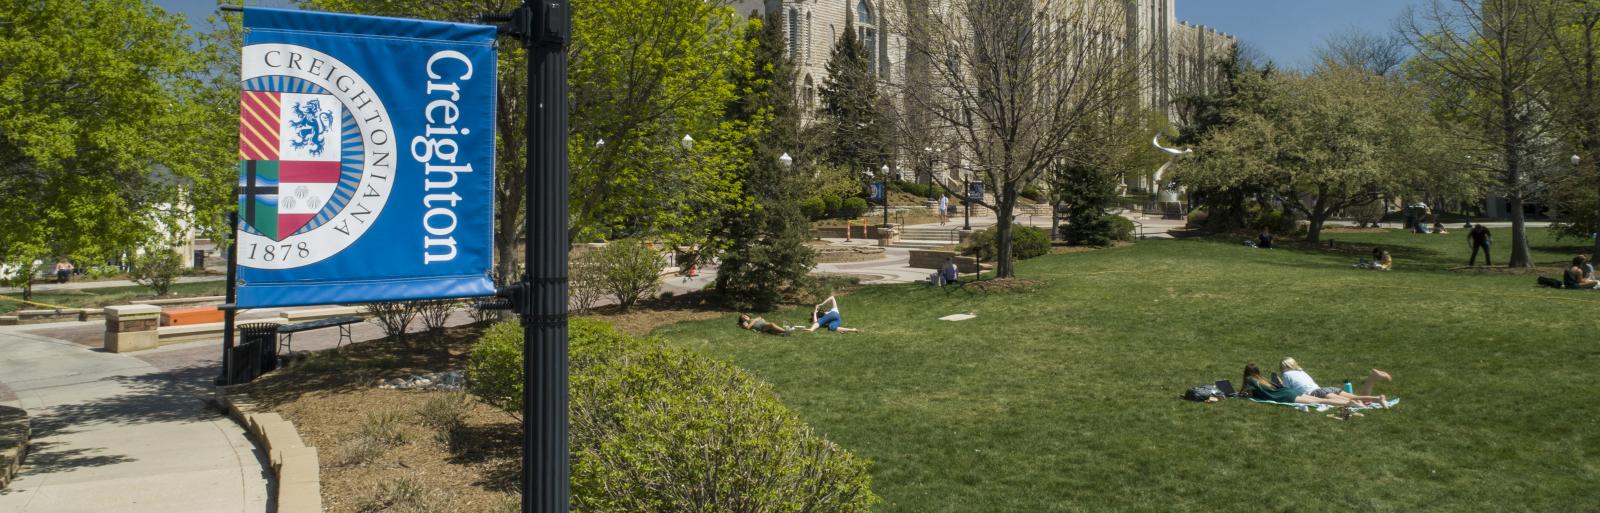 Creighton campus with students on the lawn